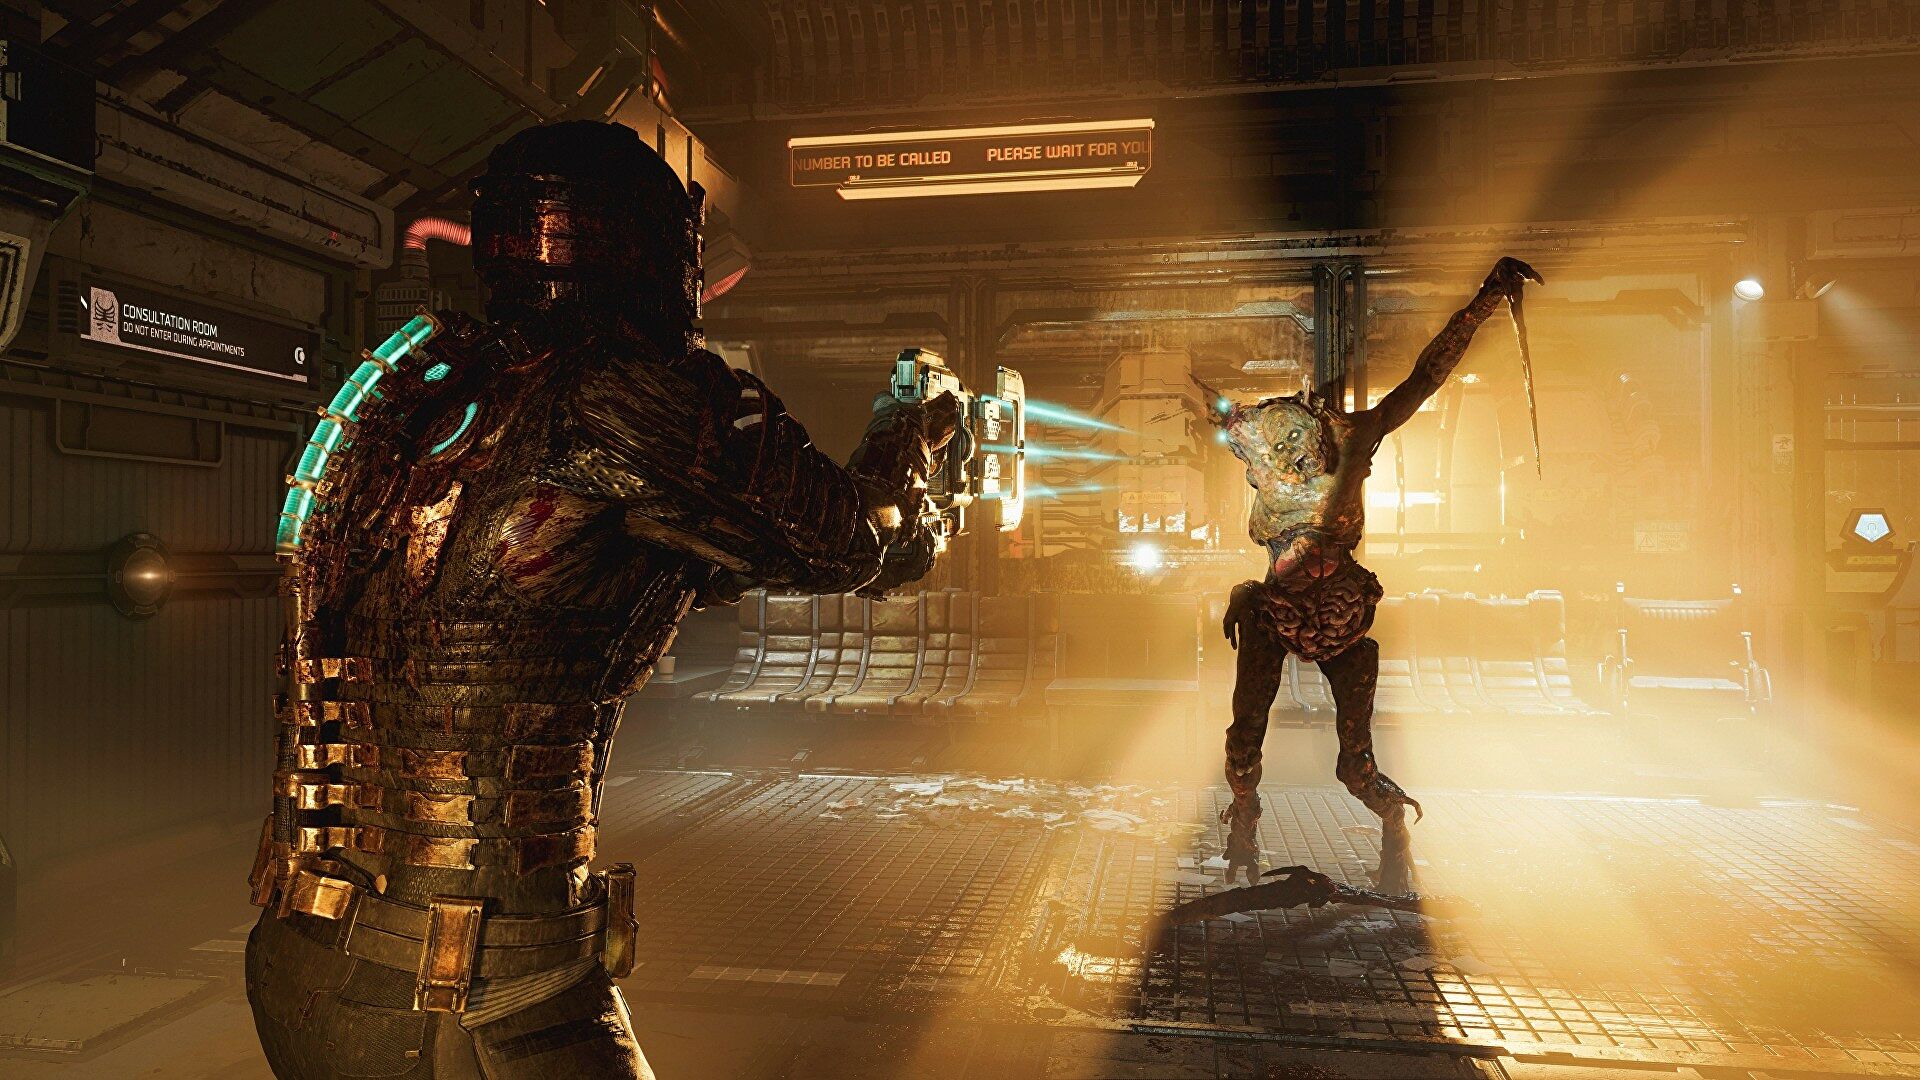 Dead Space remake devs say the entire game is “one sequential shot” with no loading